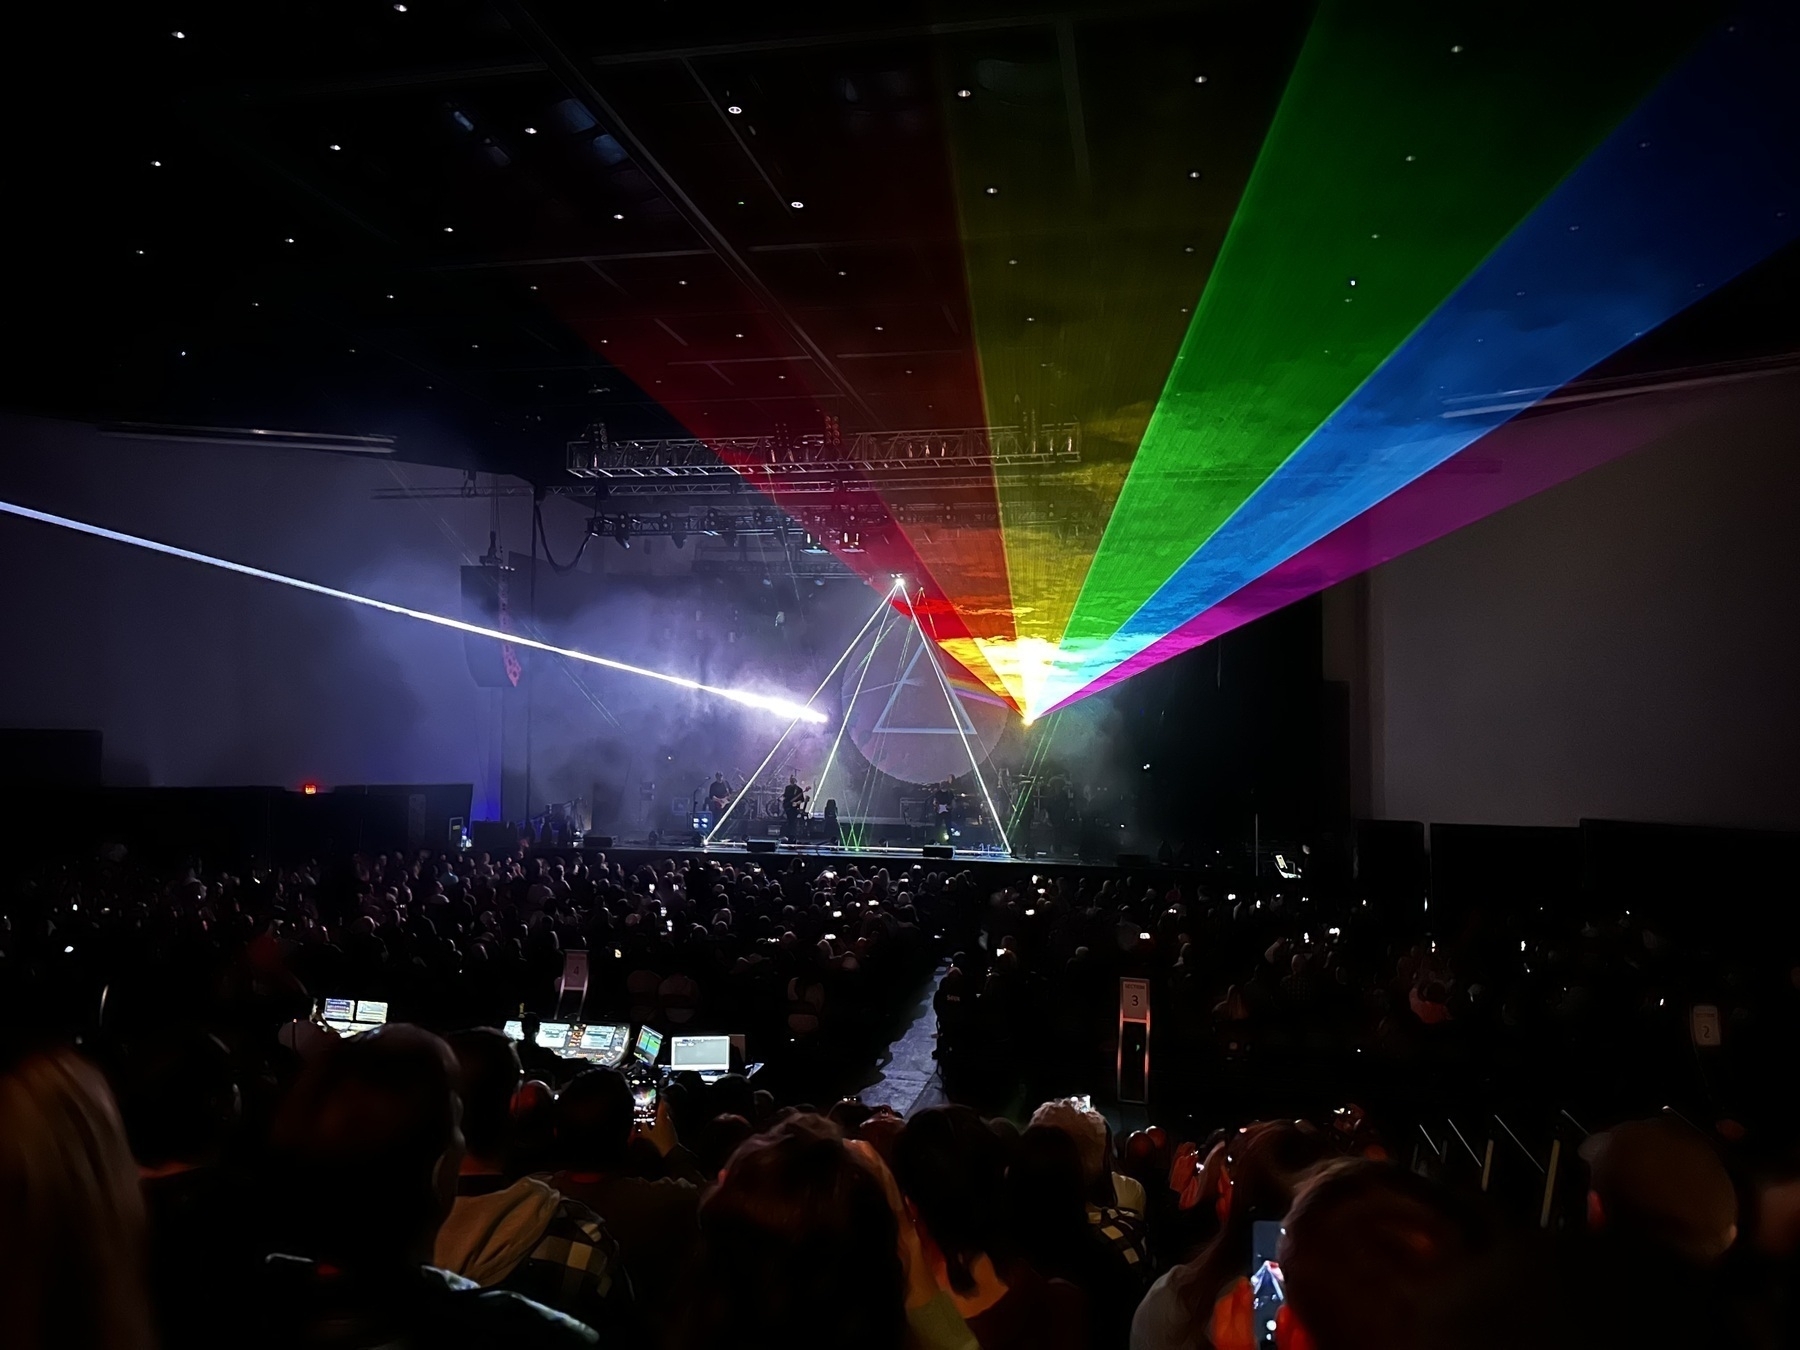 Brit Floyd in concert, depicting the Dark Side of the Moon prism cover, also repeated with laser light.